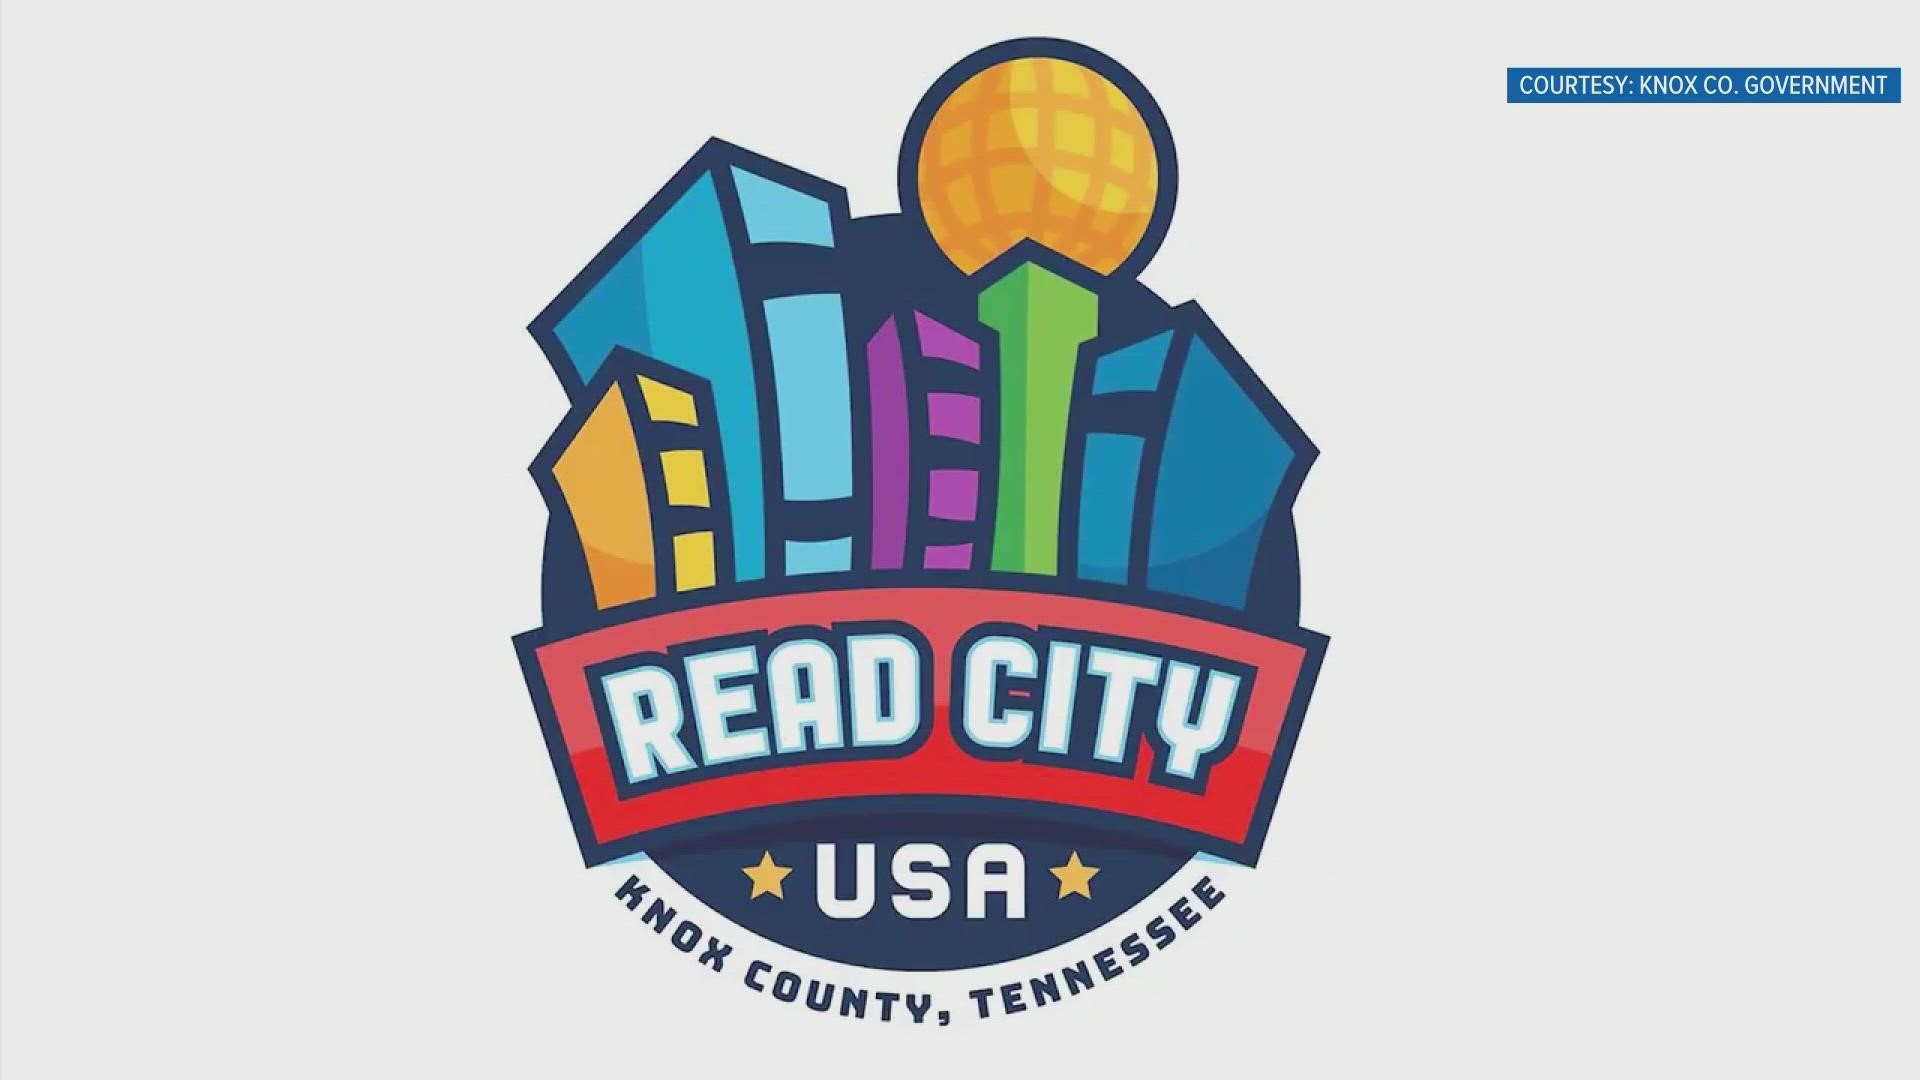 Officials said more than 9,000 people participated in the Read City USA challenge.